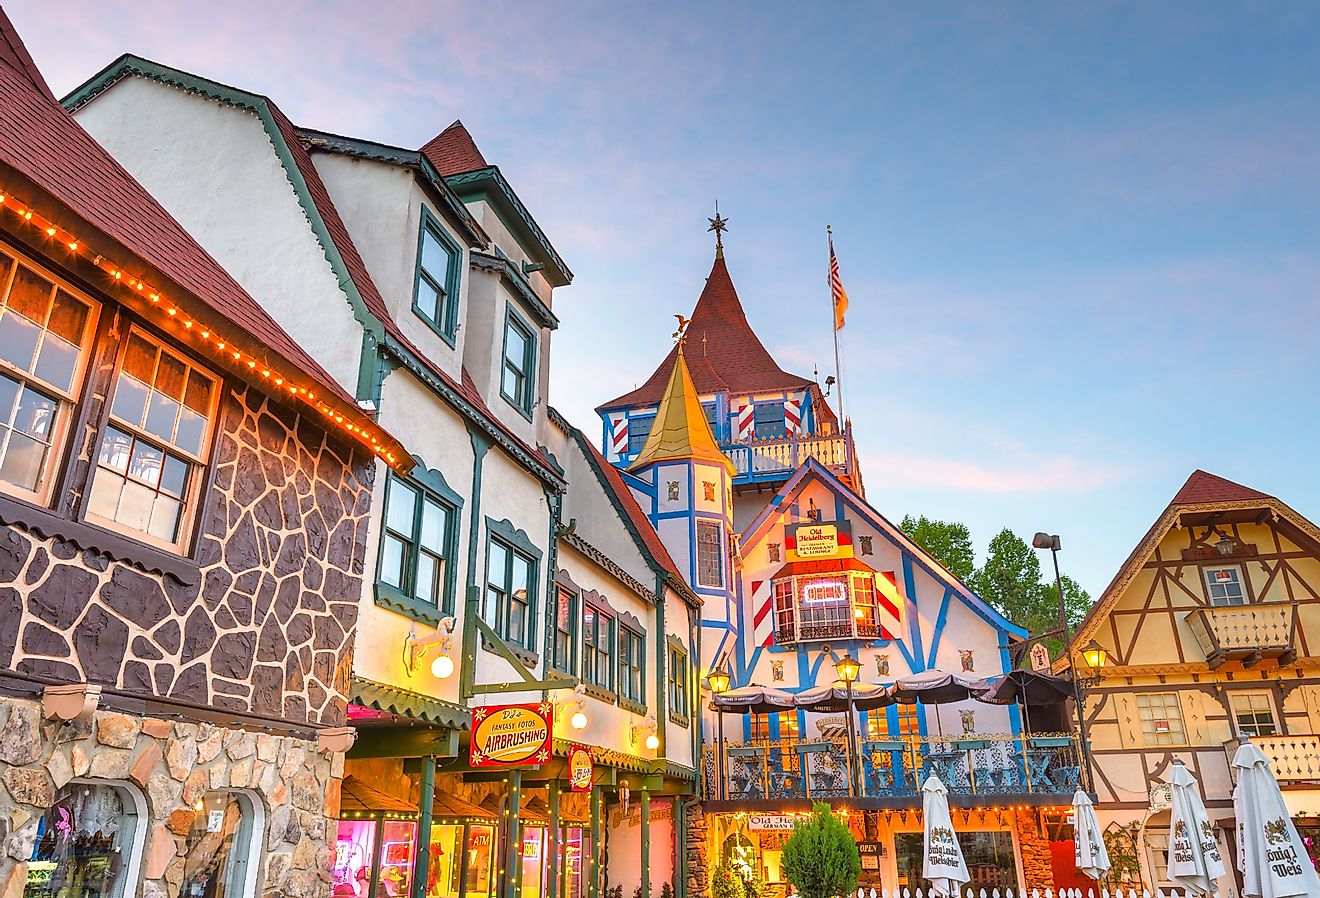 Helen, Georgia, a replica of a Bavarian alpine town catering mainly to tourism and the German style architecture. Image credit Sean Pavone via Shutterstock